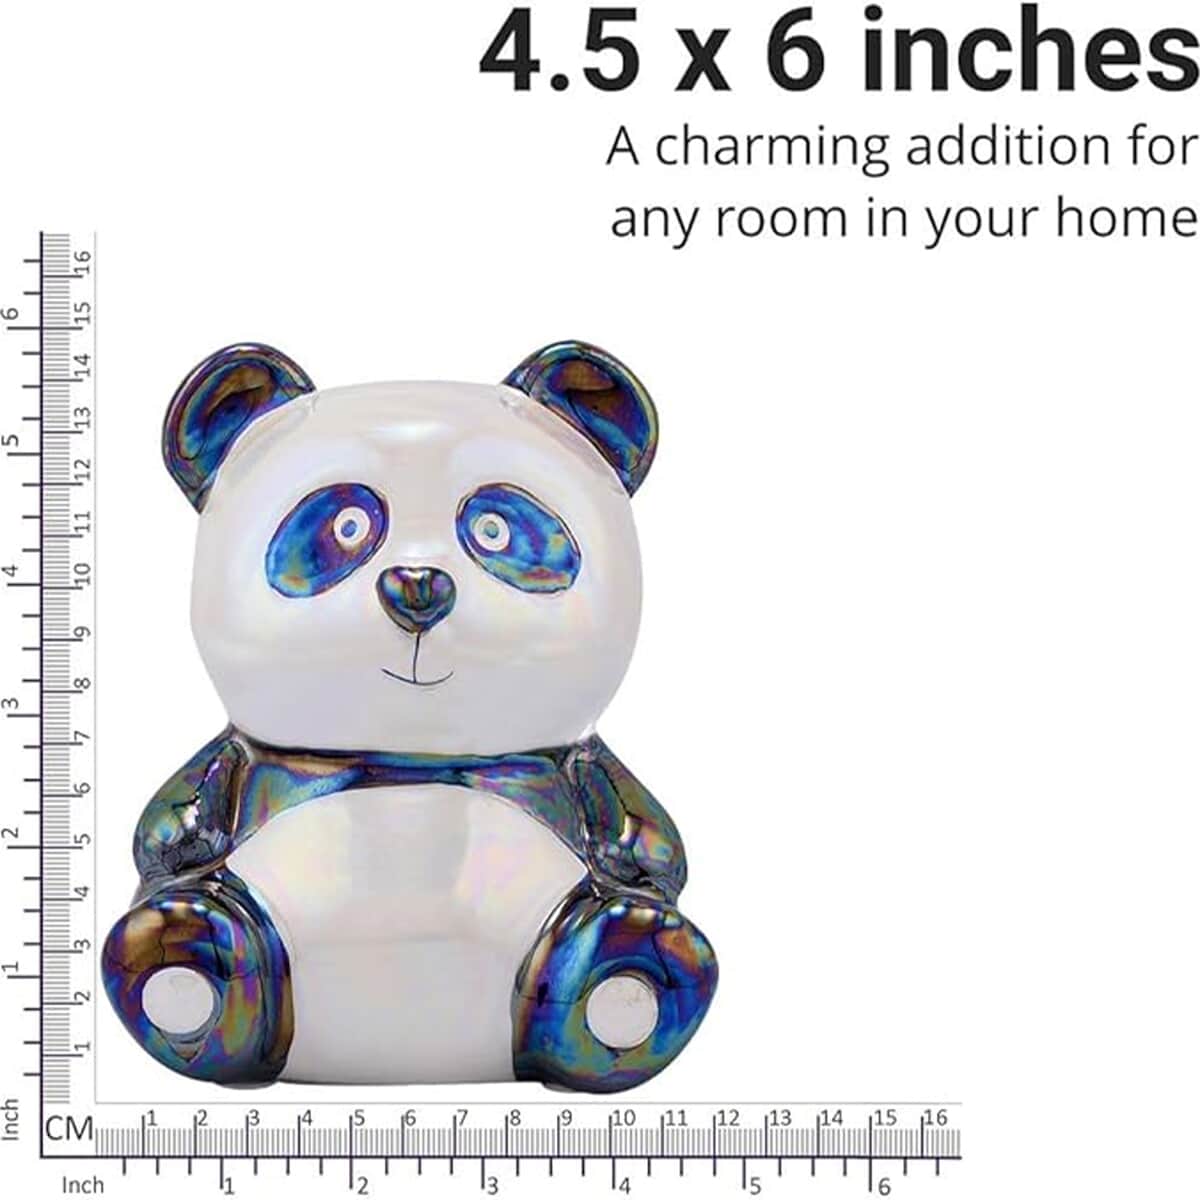 Black and White Ceramic Panda Money Bank, Panda Baby Piggy Bank, First Coin Bank, Best Birthday for Kids, Boys Girls Home Decoration image number 5